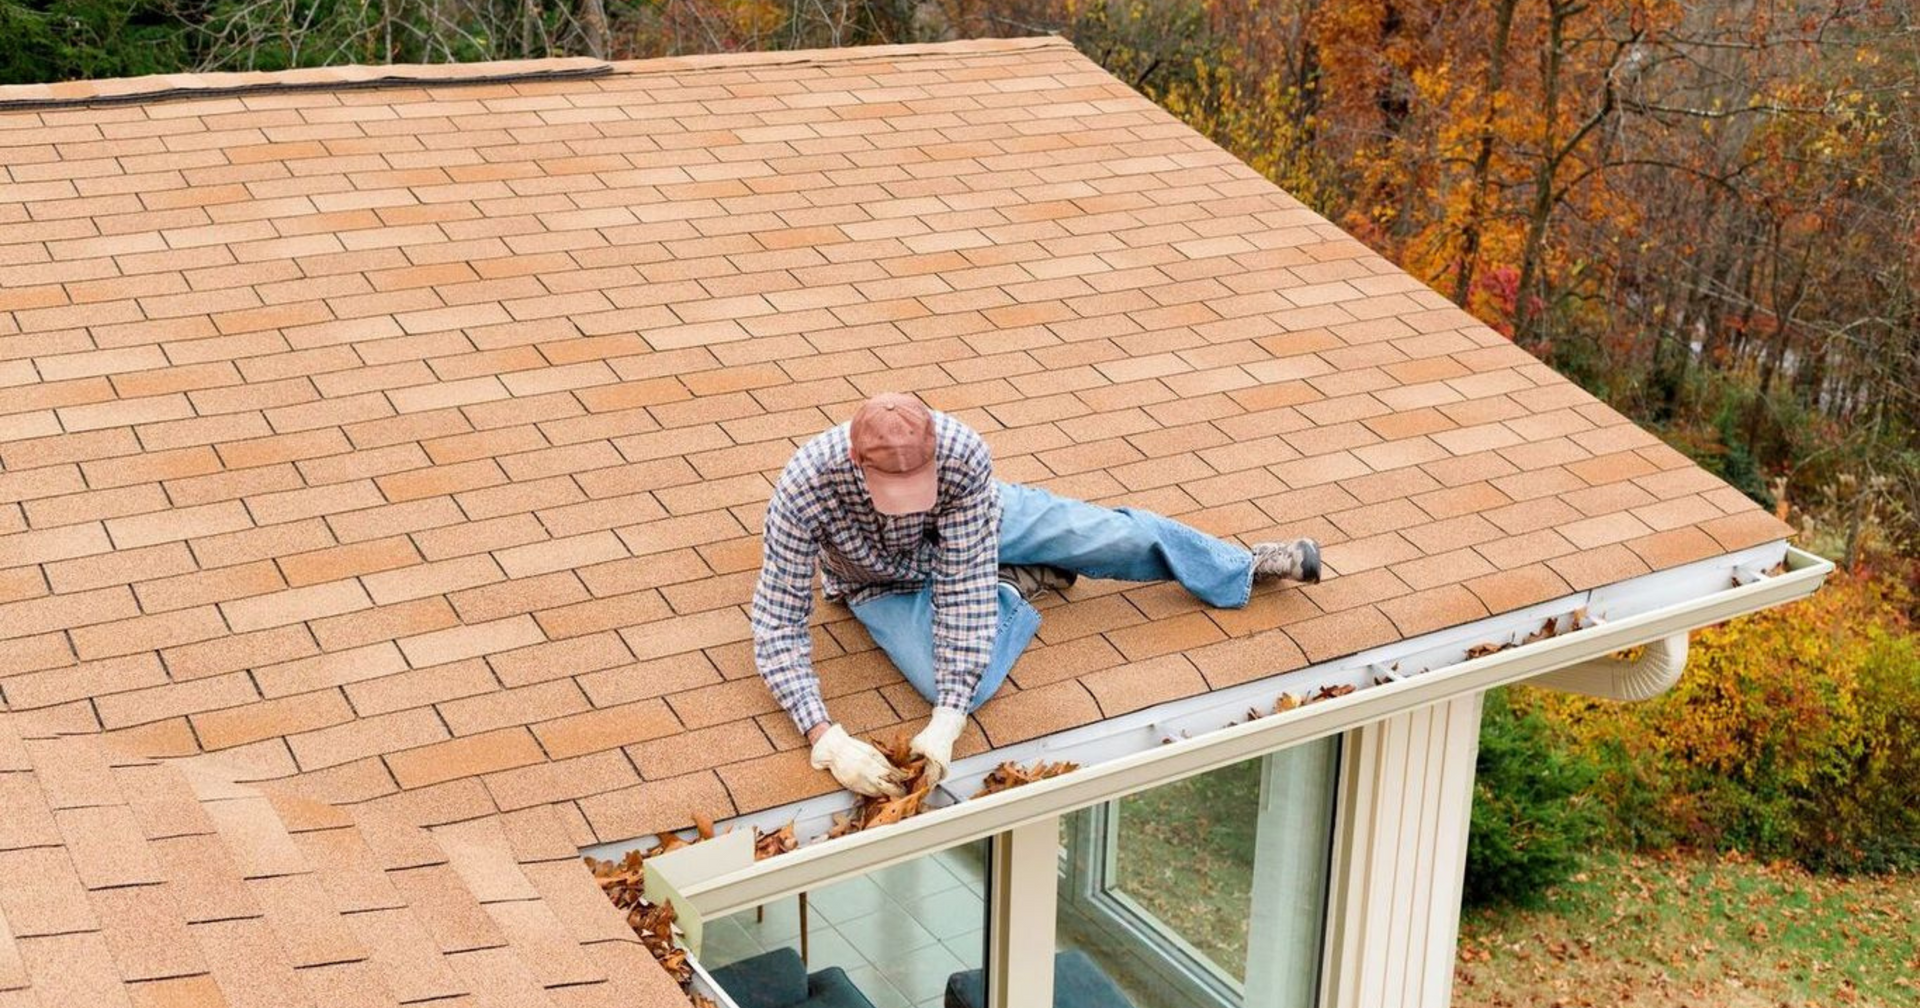 Ensuring the Longevity and Integrity of Your Roof